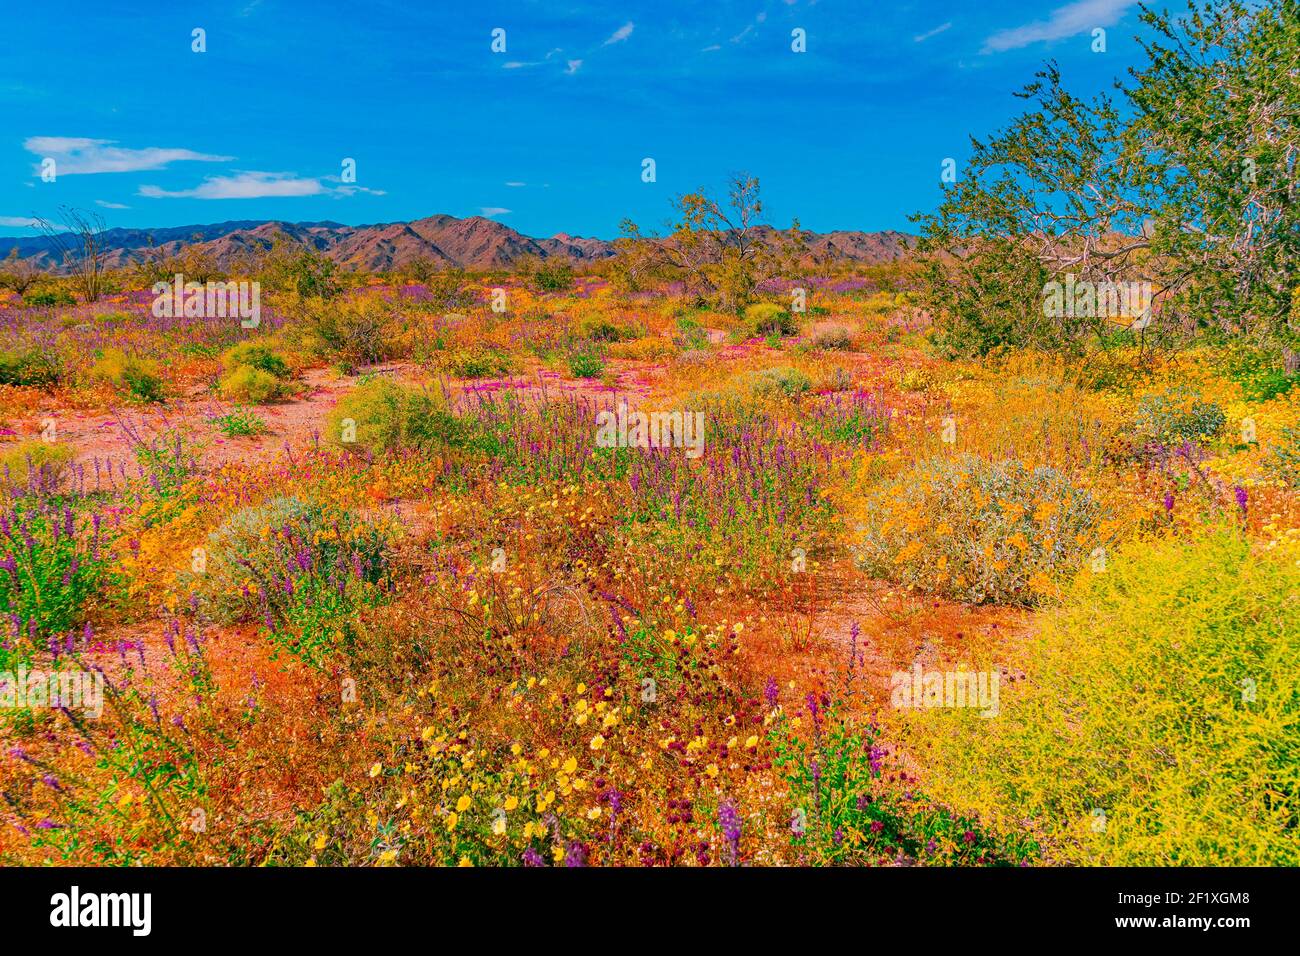 Joshua Tree National Park is in  spring bloom with bright yellows and pinks in the desert meadow. Stock Photo